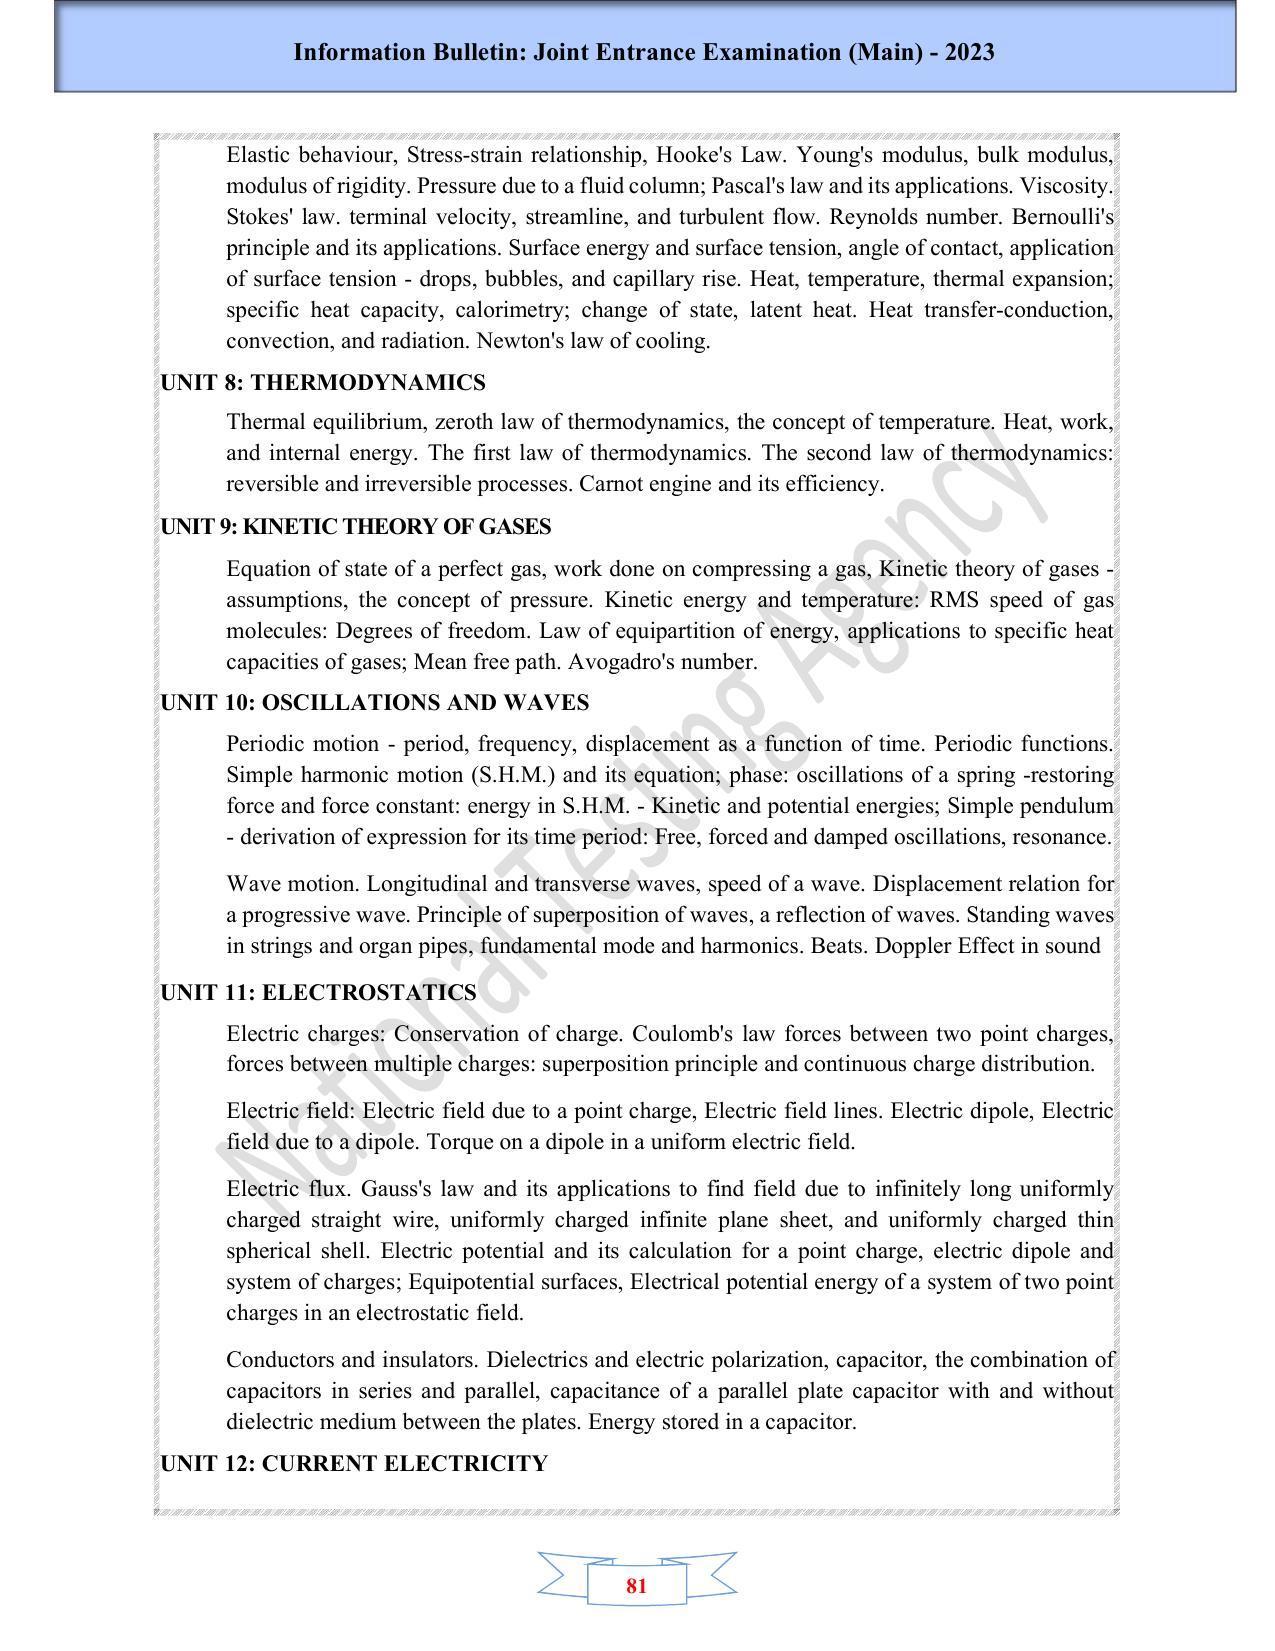 JEE Main 2023 Session 2 - Page 83